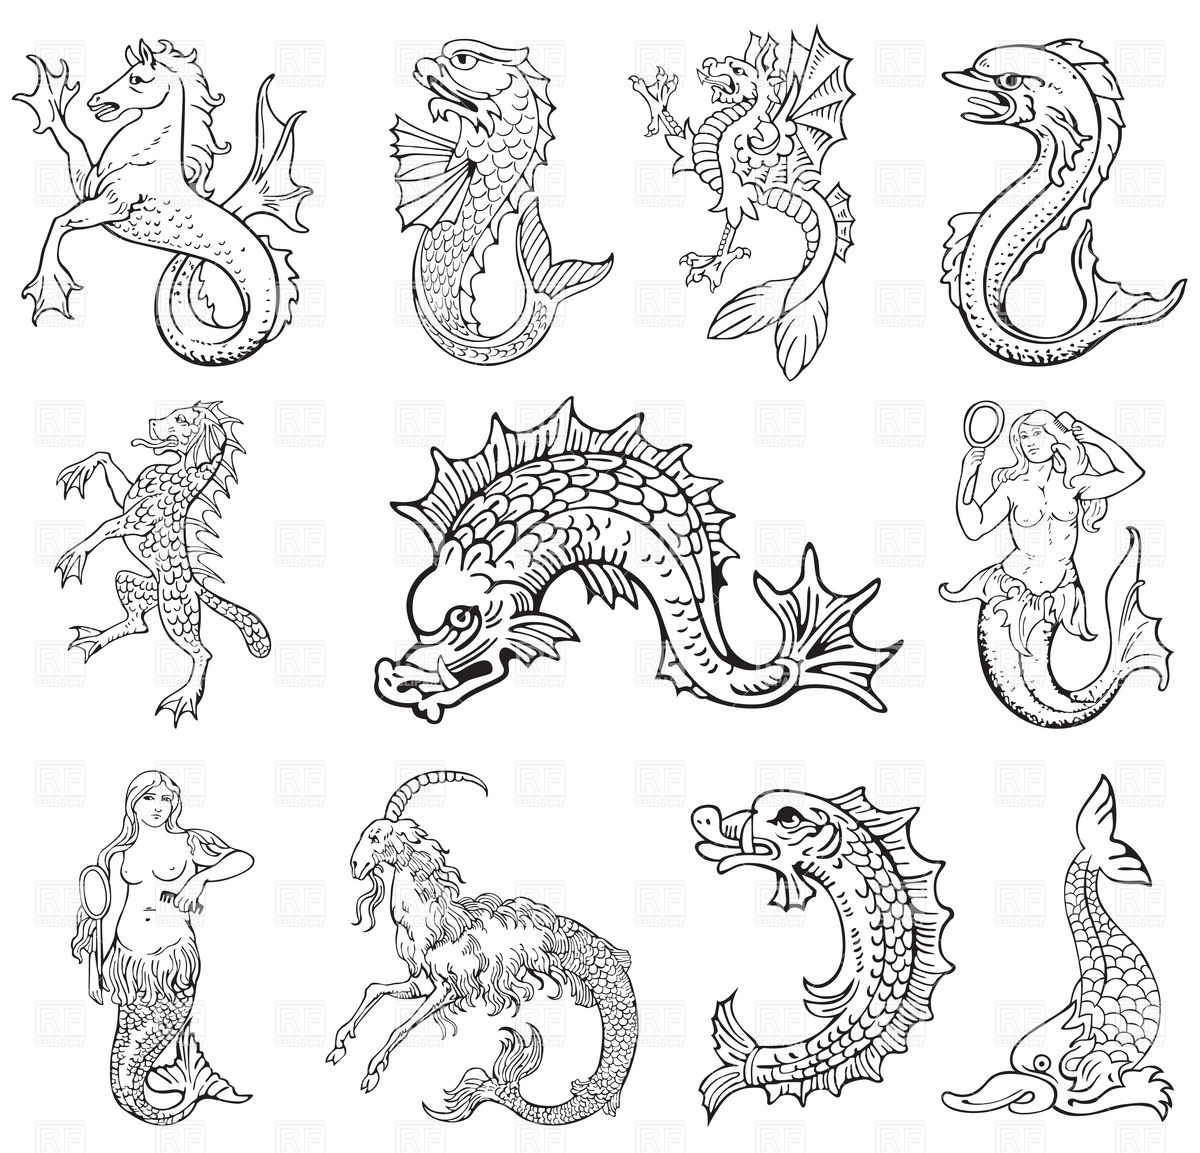 Sea Monster clipart #9, Download drawings